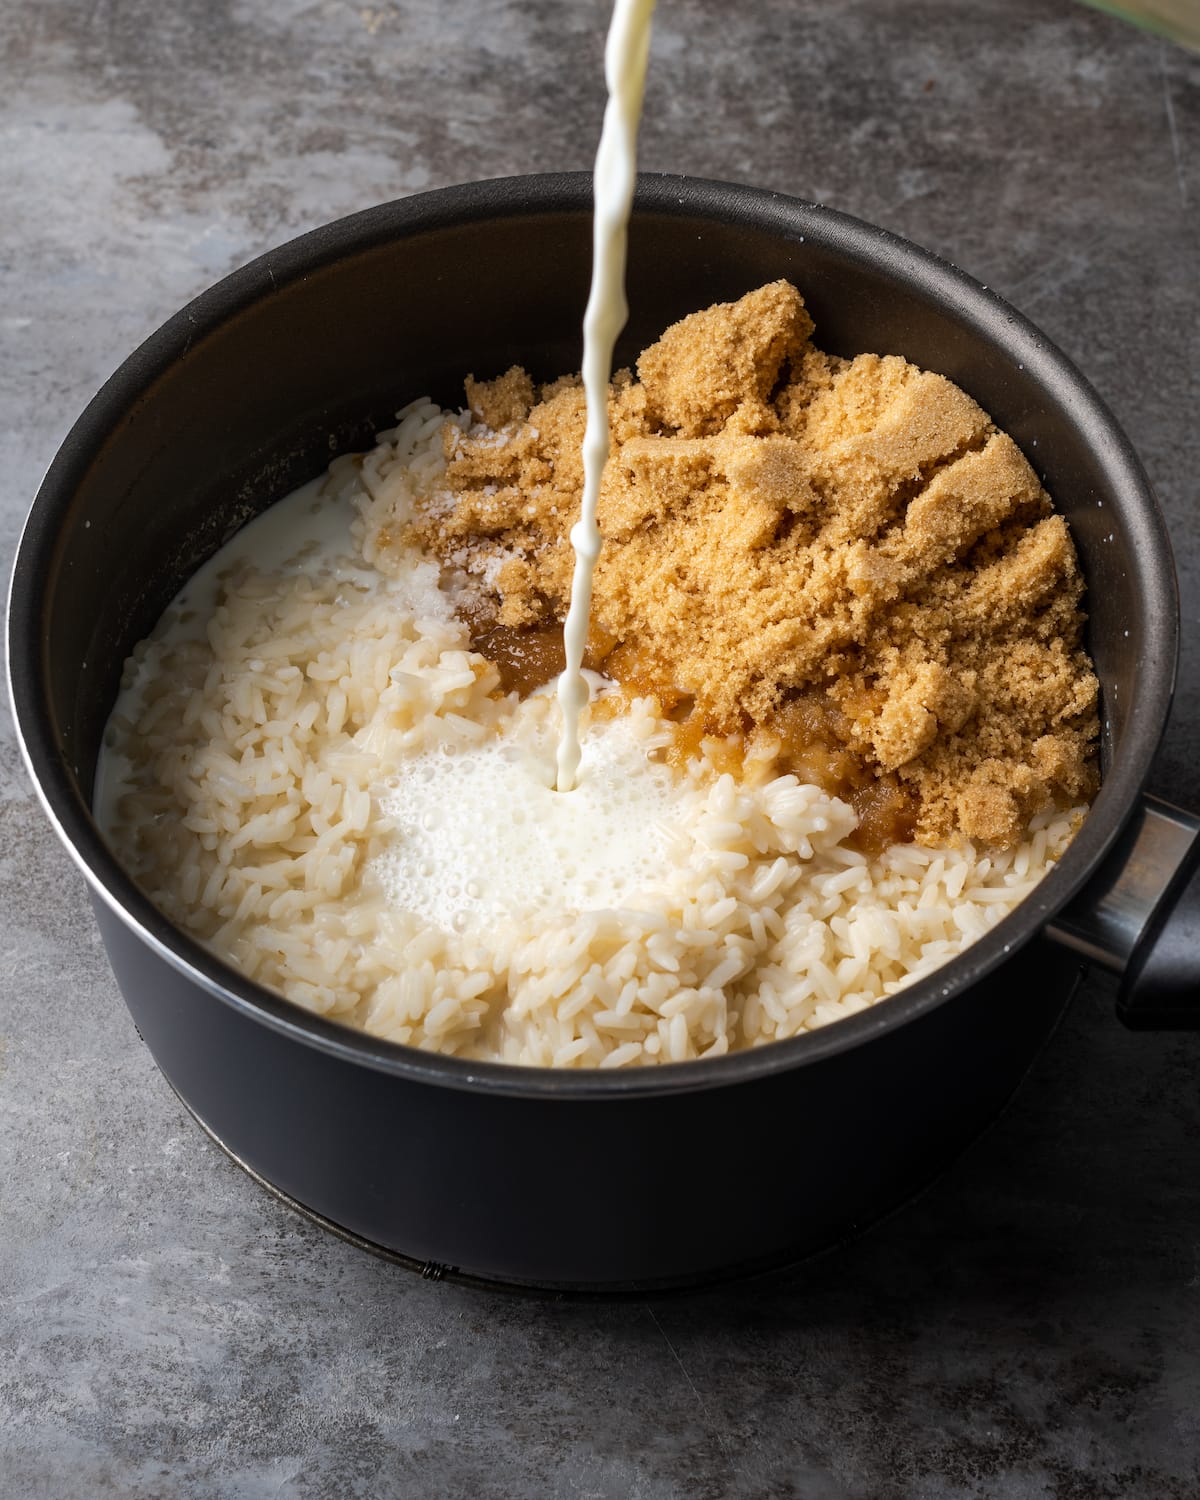 Milk and brown sugar are added into a black saucepan filled with rice.